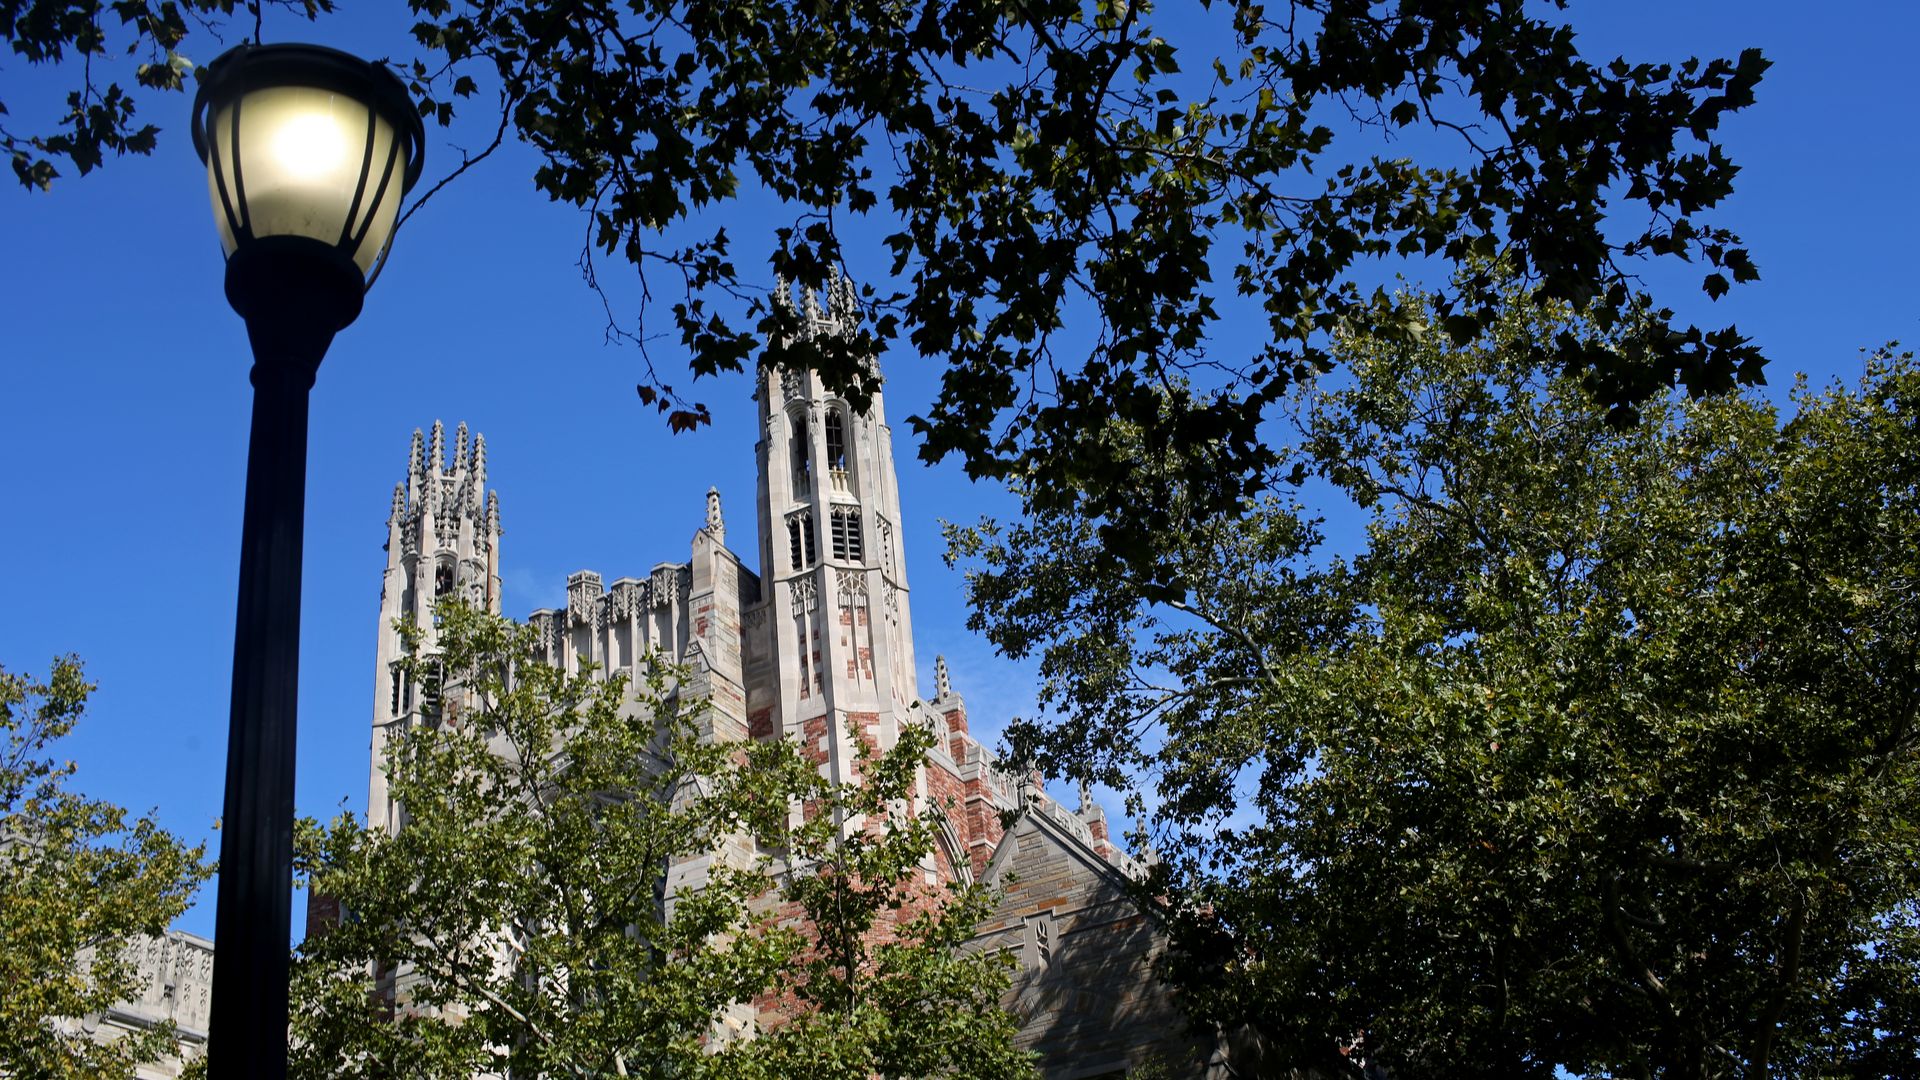 A Yale University building behind tree branches.